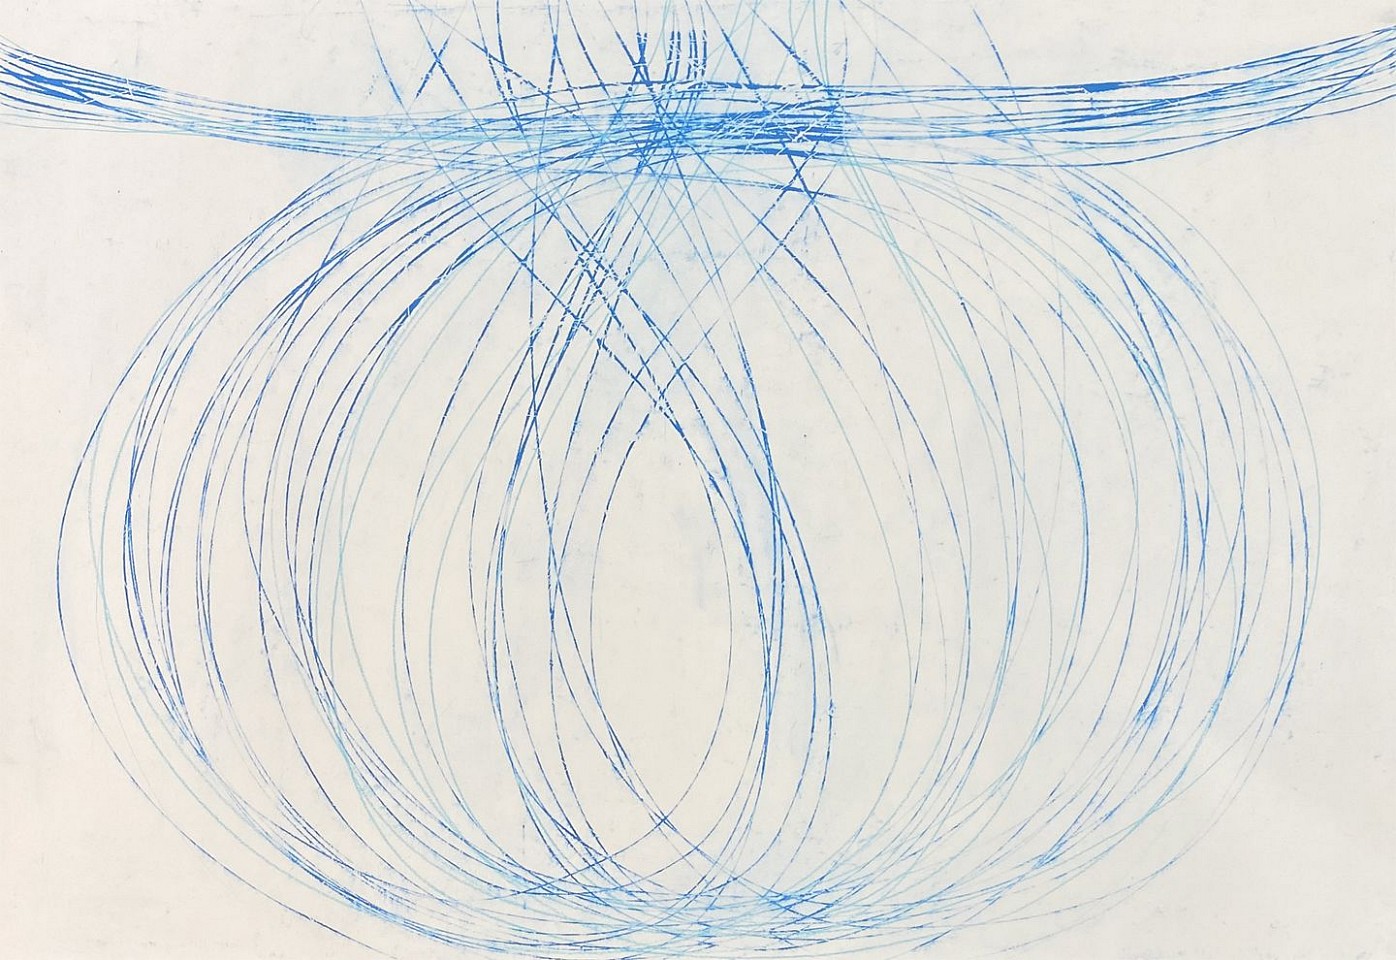 Doug Glovaski
Motion in Blue 1.23.5, 2023
GIOV549
transfer with oil and wax on paper, 30 x 44 inches